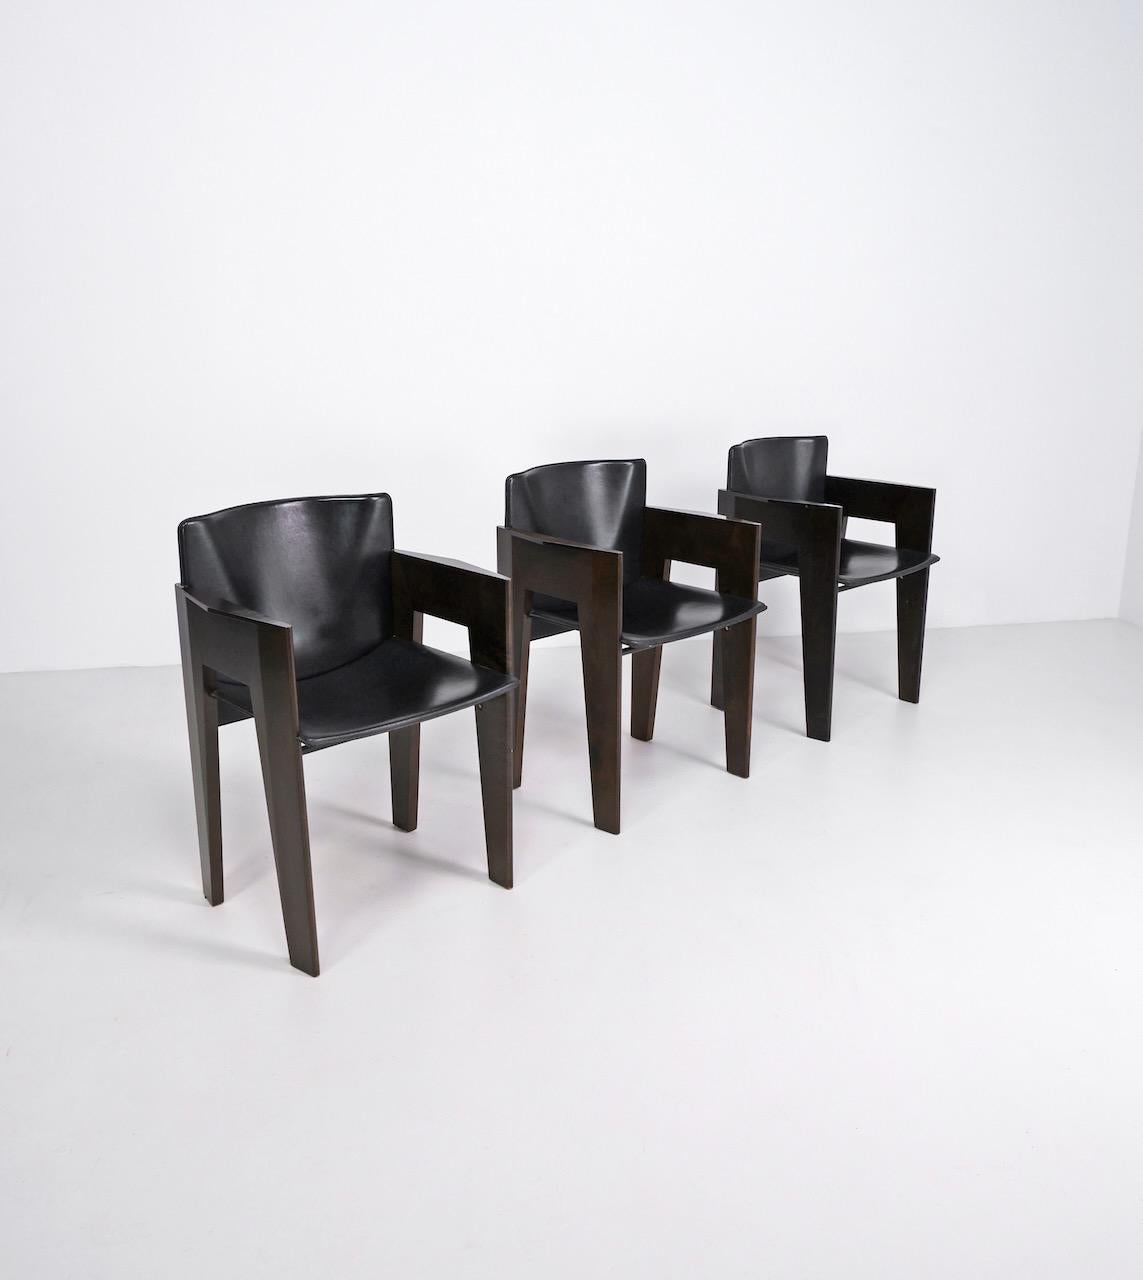 Black leather and stained wooden dining chairs designed by Dutch designer Arnold Merckx and produced by Arco in the 1980s. 

Arnold Merckx graduated from the Academy of Visual Arts and Technical Sciences in Rotterdam, after which he founded his